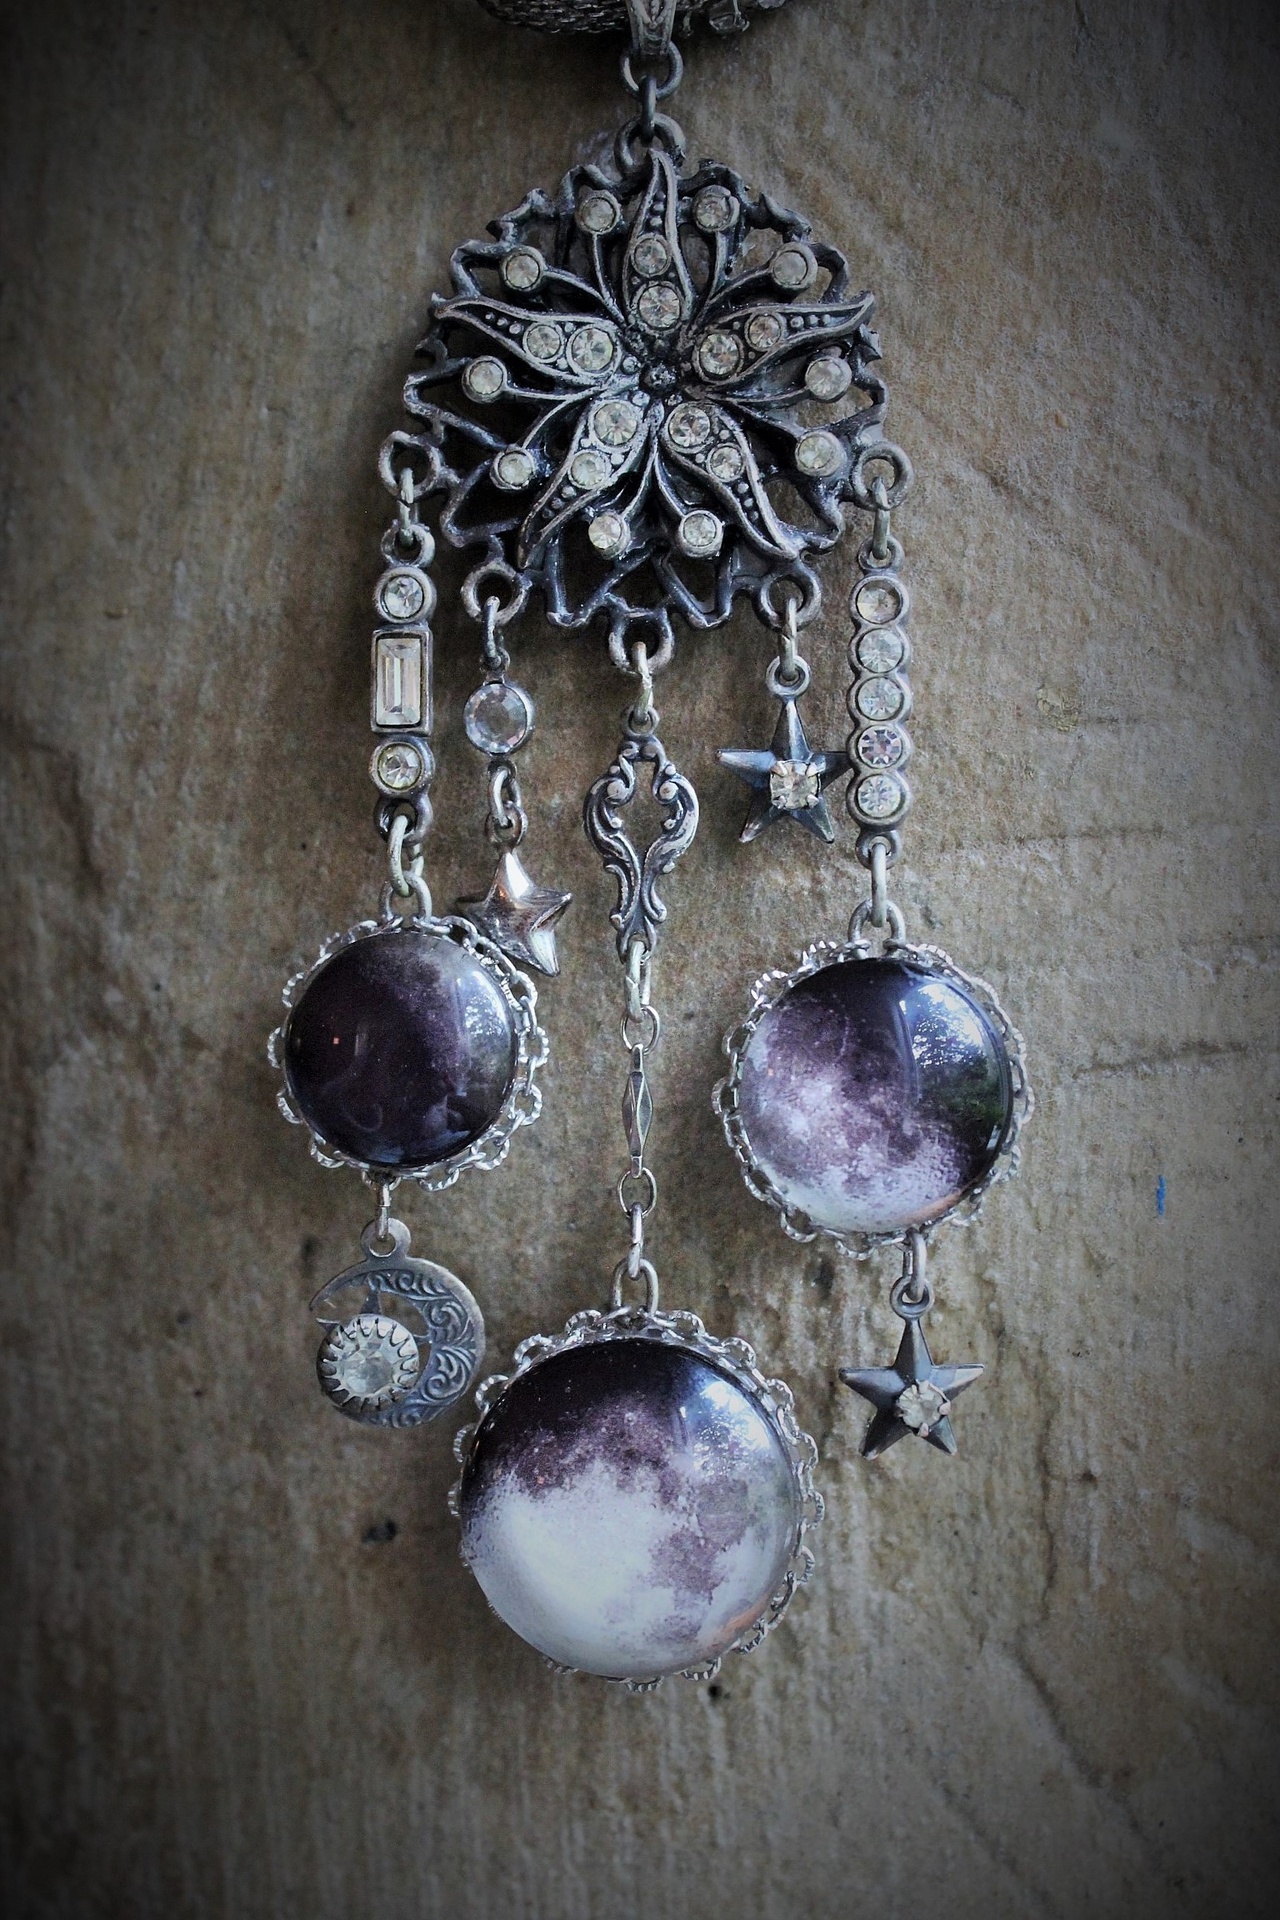 The Moon & Fire Within Necklace with Antique Mesh Chain,Moon Phase Orbs,Tiny Antique Moon & Stars